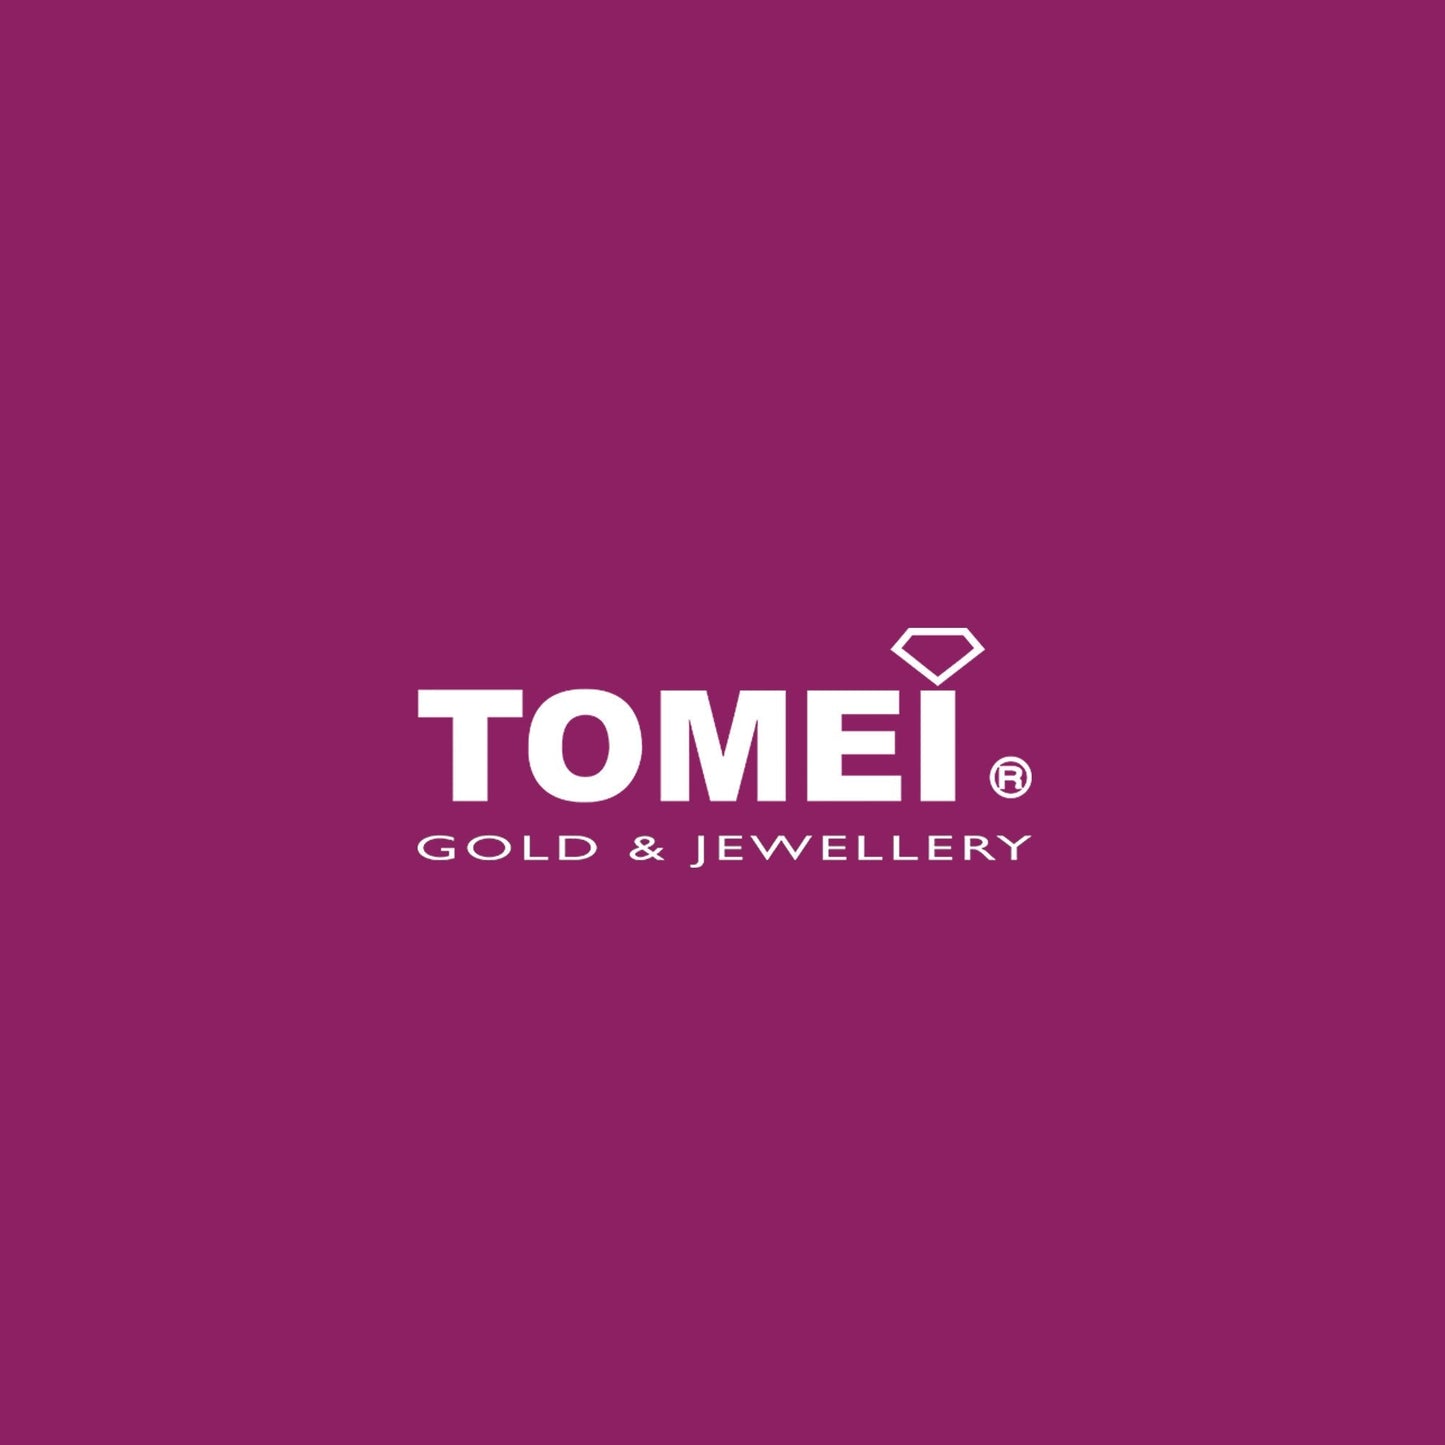 TOMEI [Online Exclusive] Vintage Coin Pendant, White Gold 375